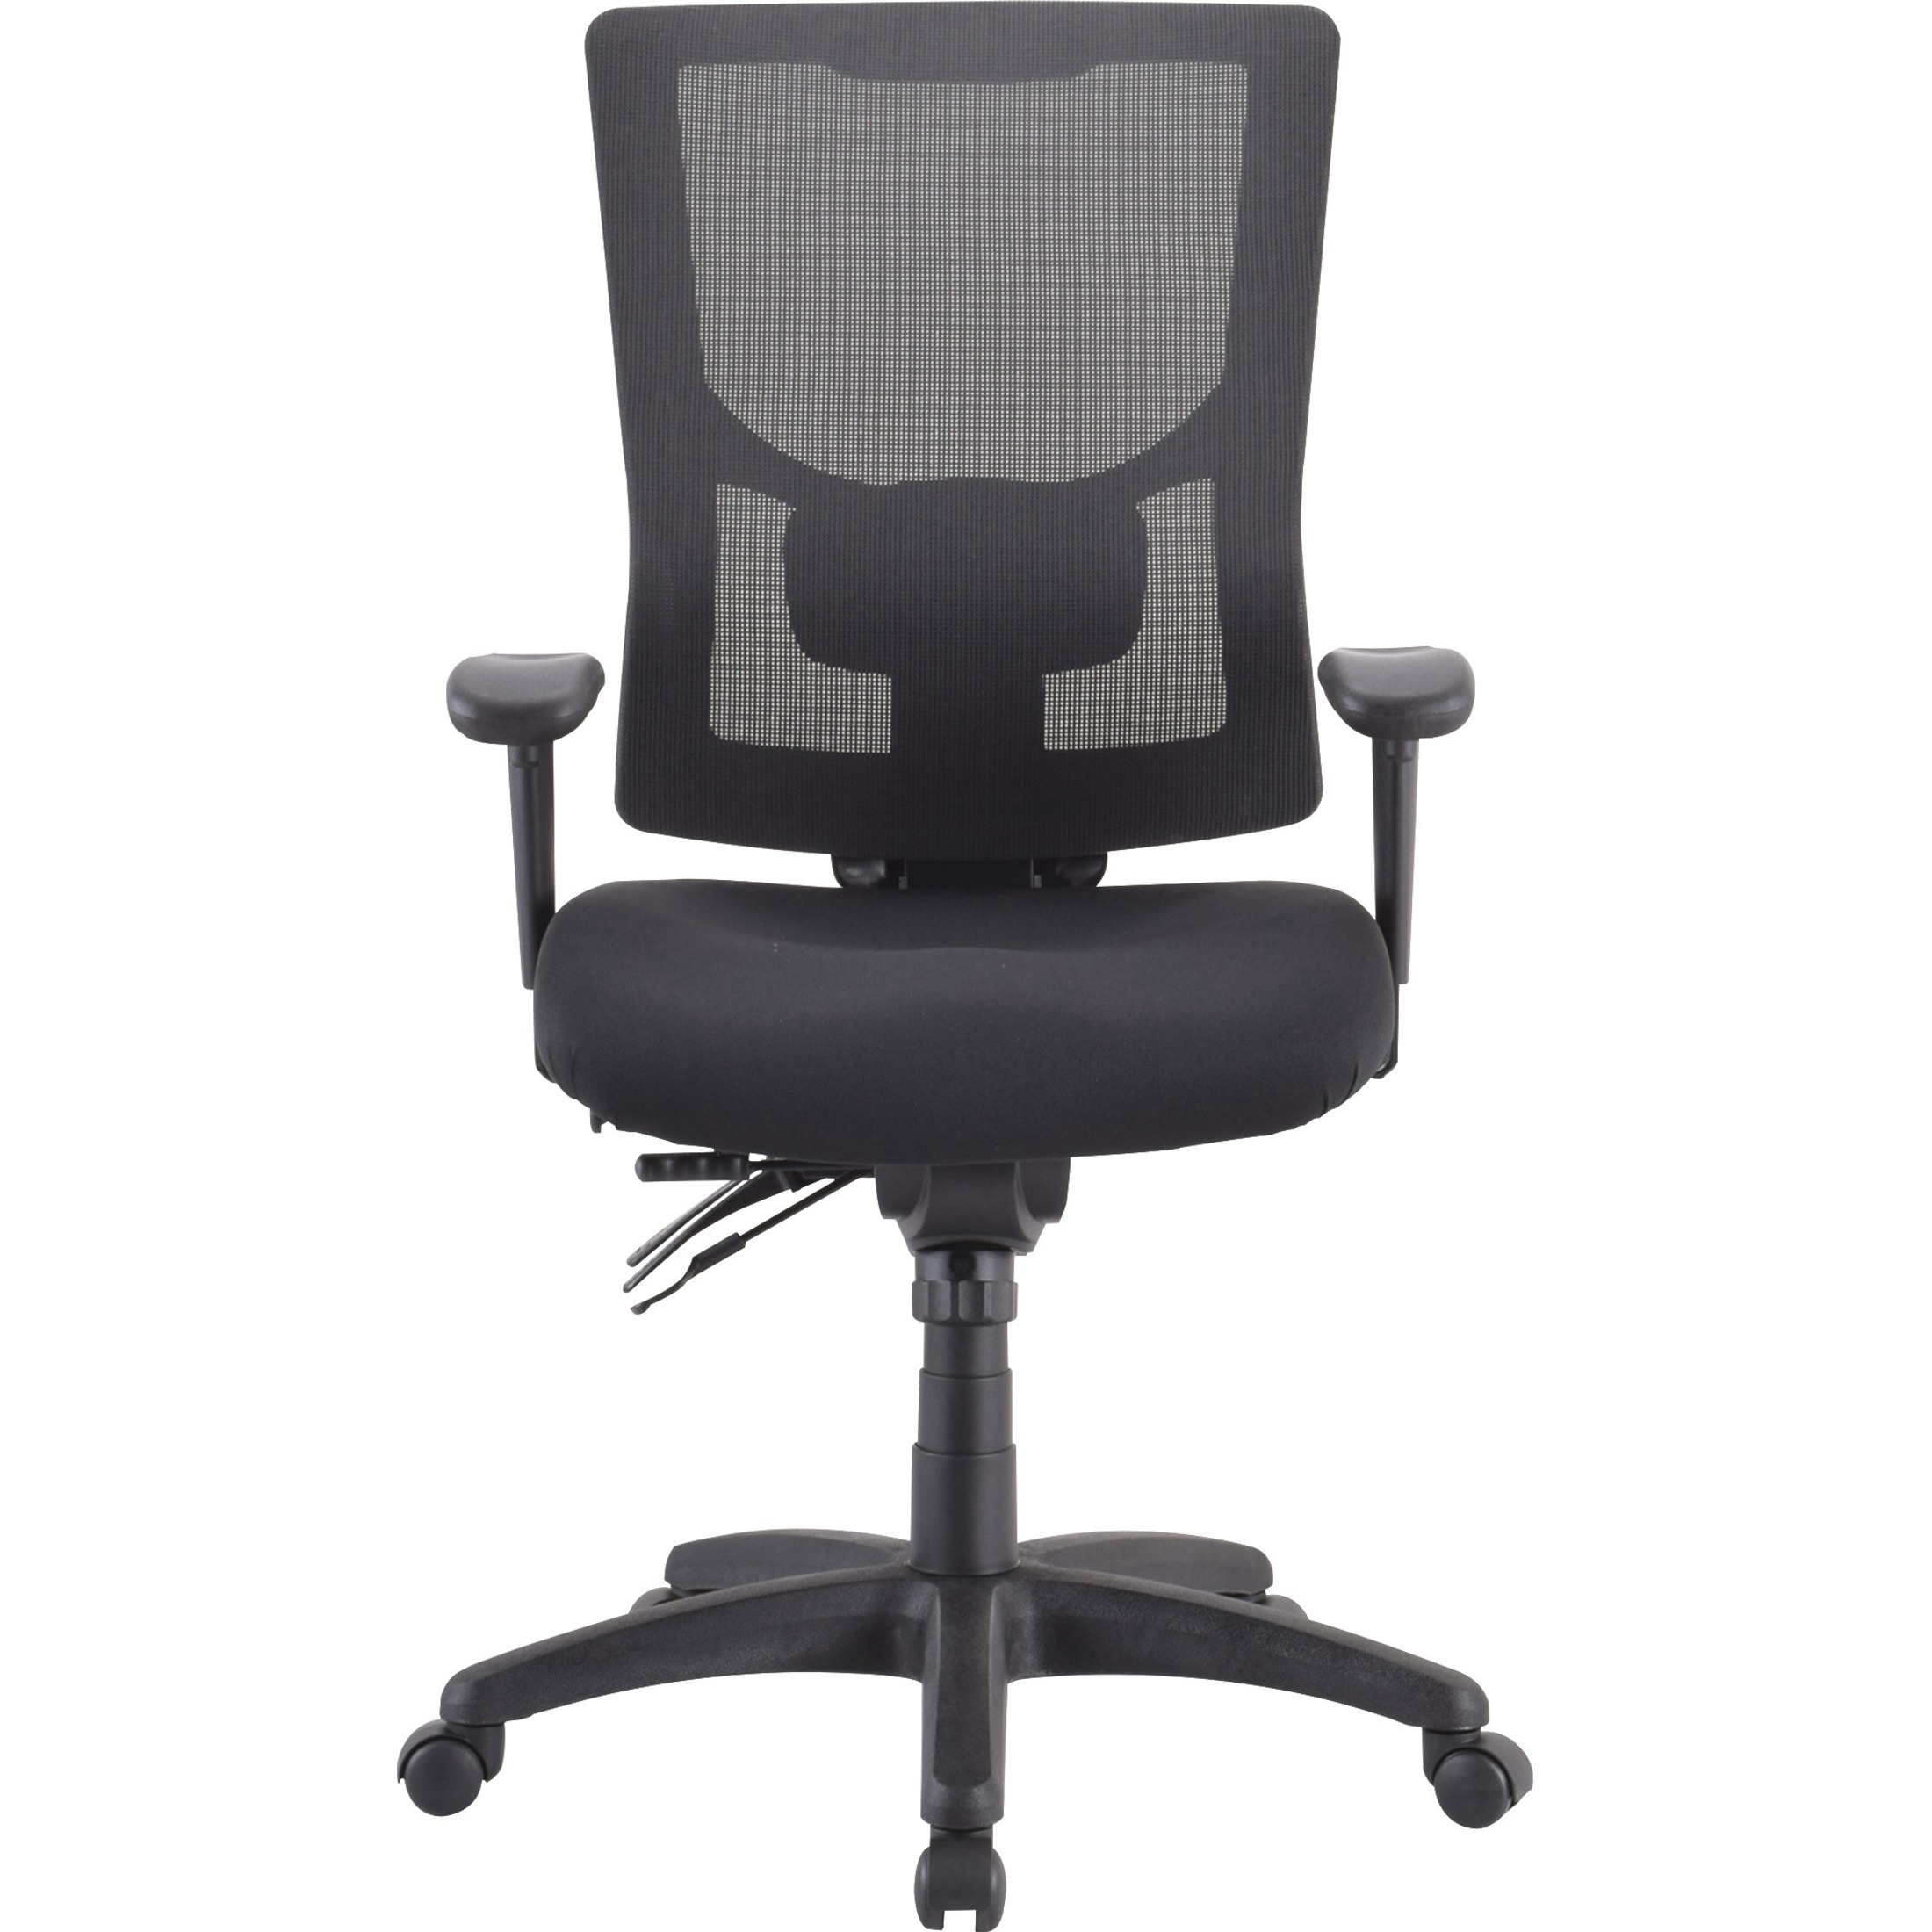 Lorell Conjure Executive High-back Mesh Back Chair - image 3 of 6